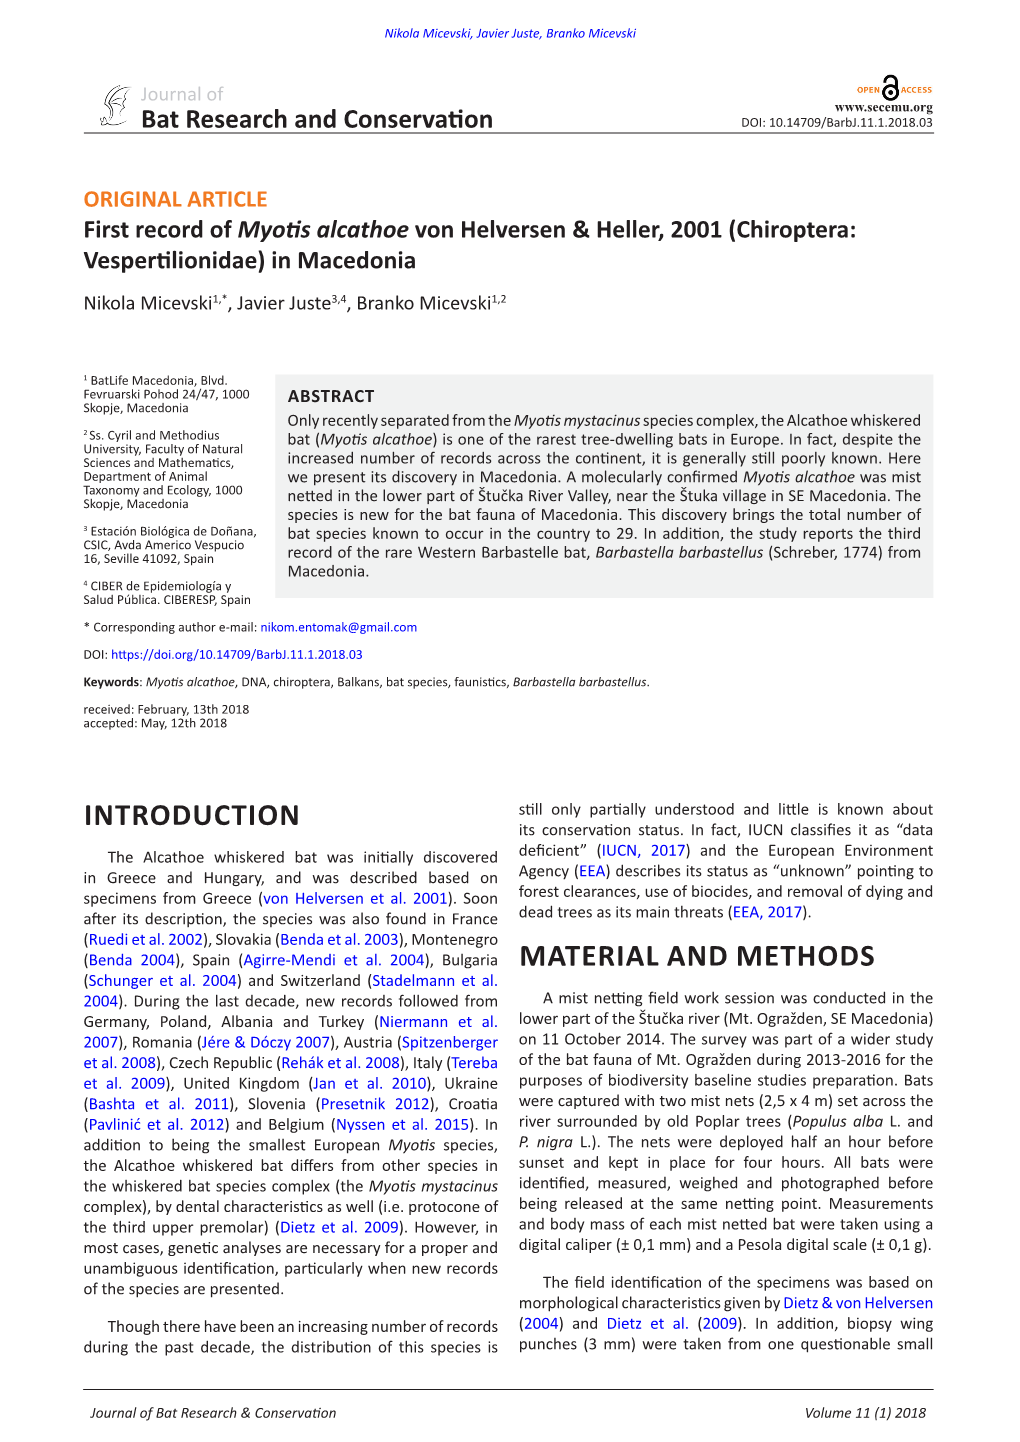 Introduction Material and Methods